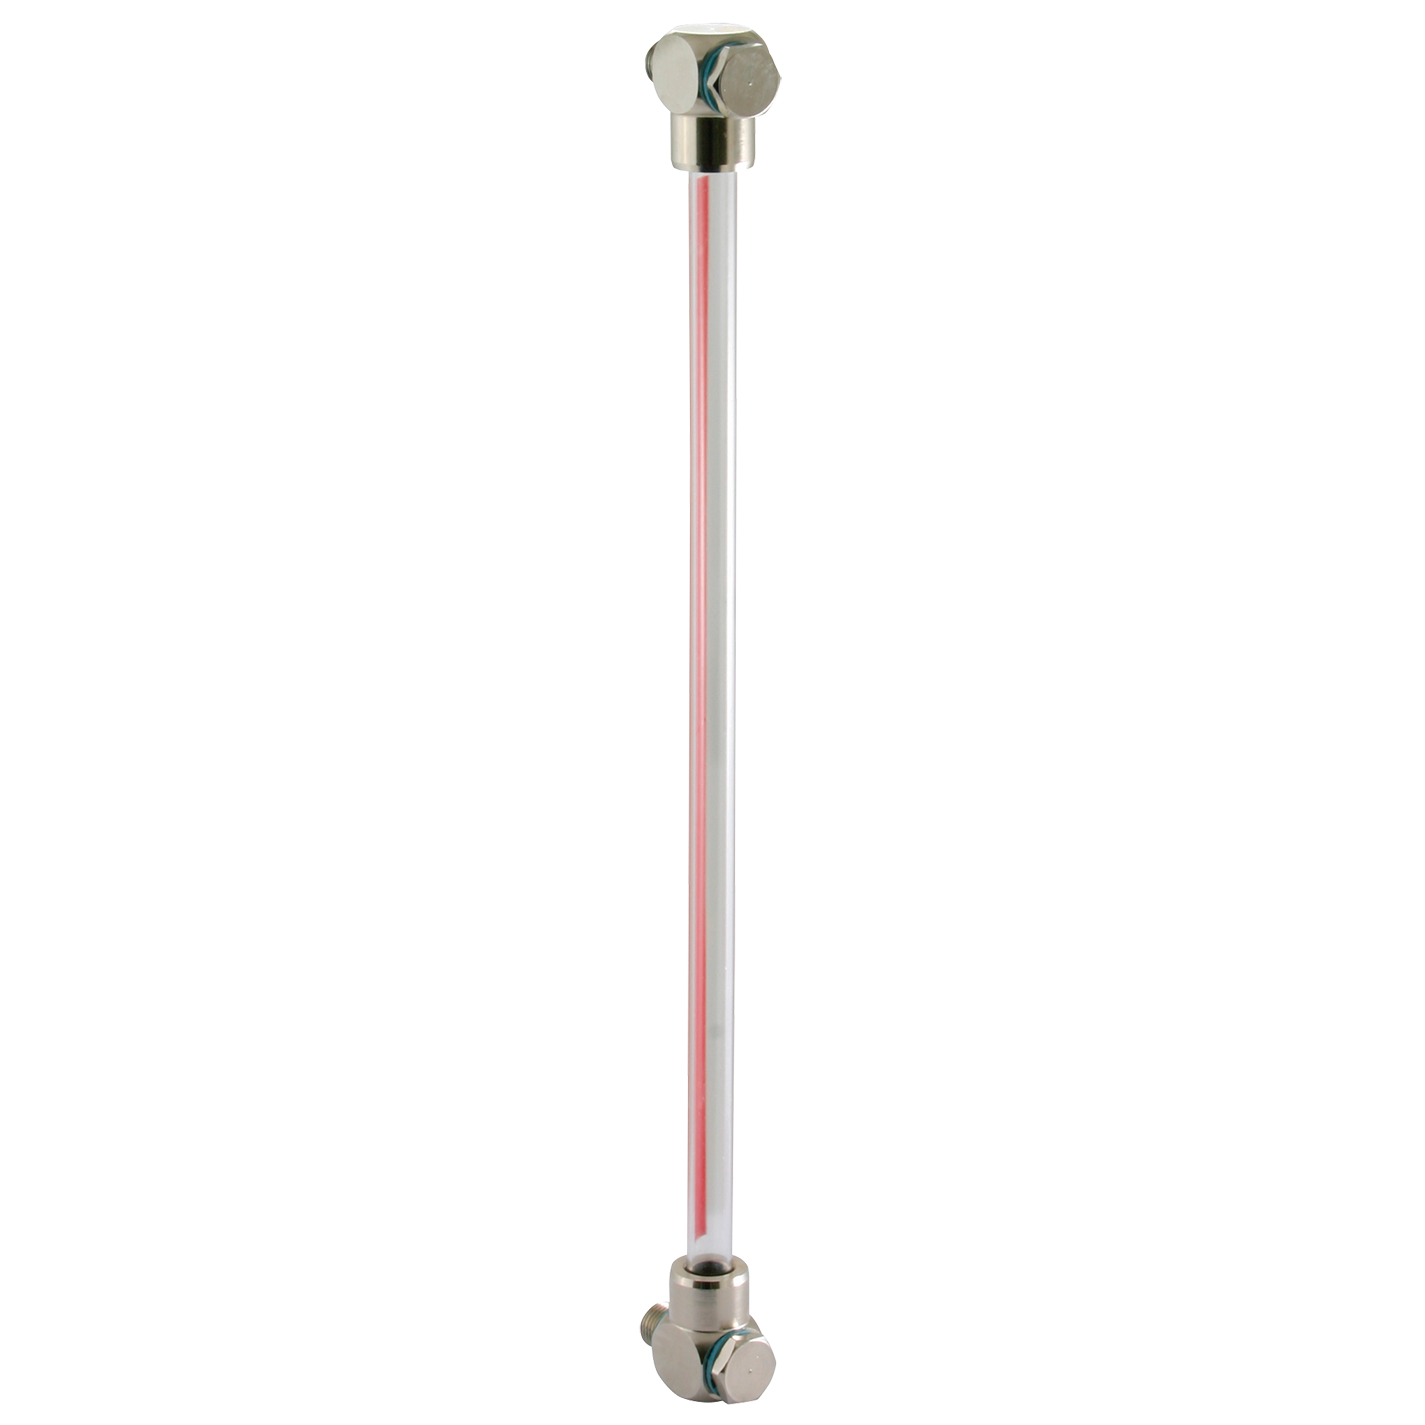 1/4" BSP Fluid Level Gauge W/O Thermometer Centres 900mm